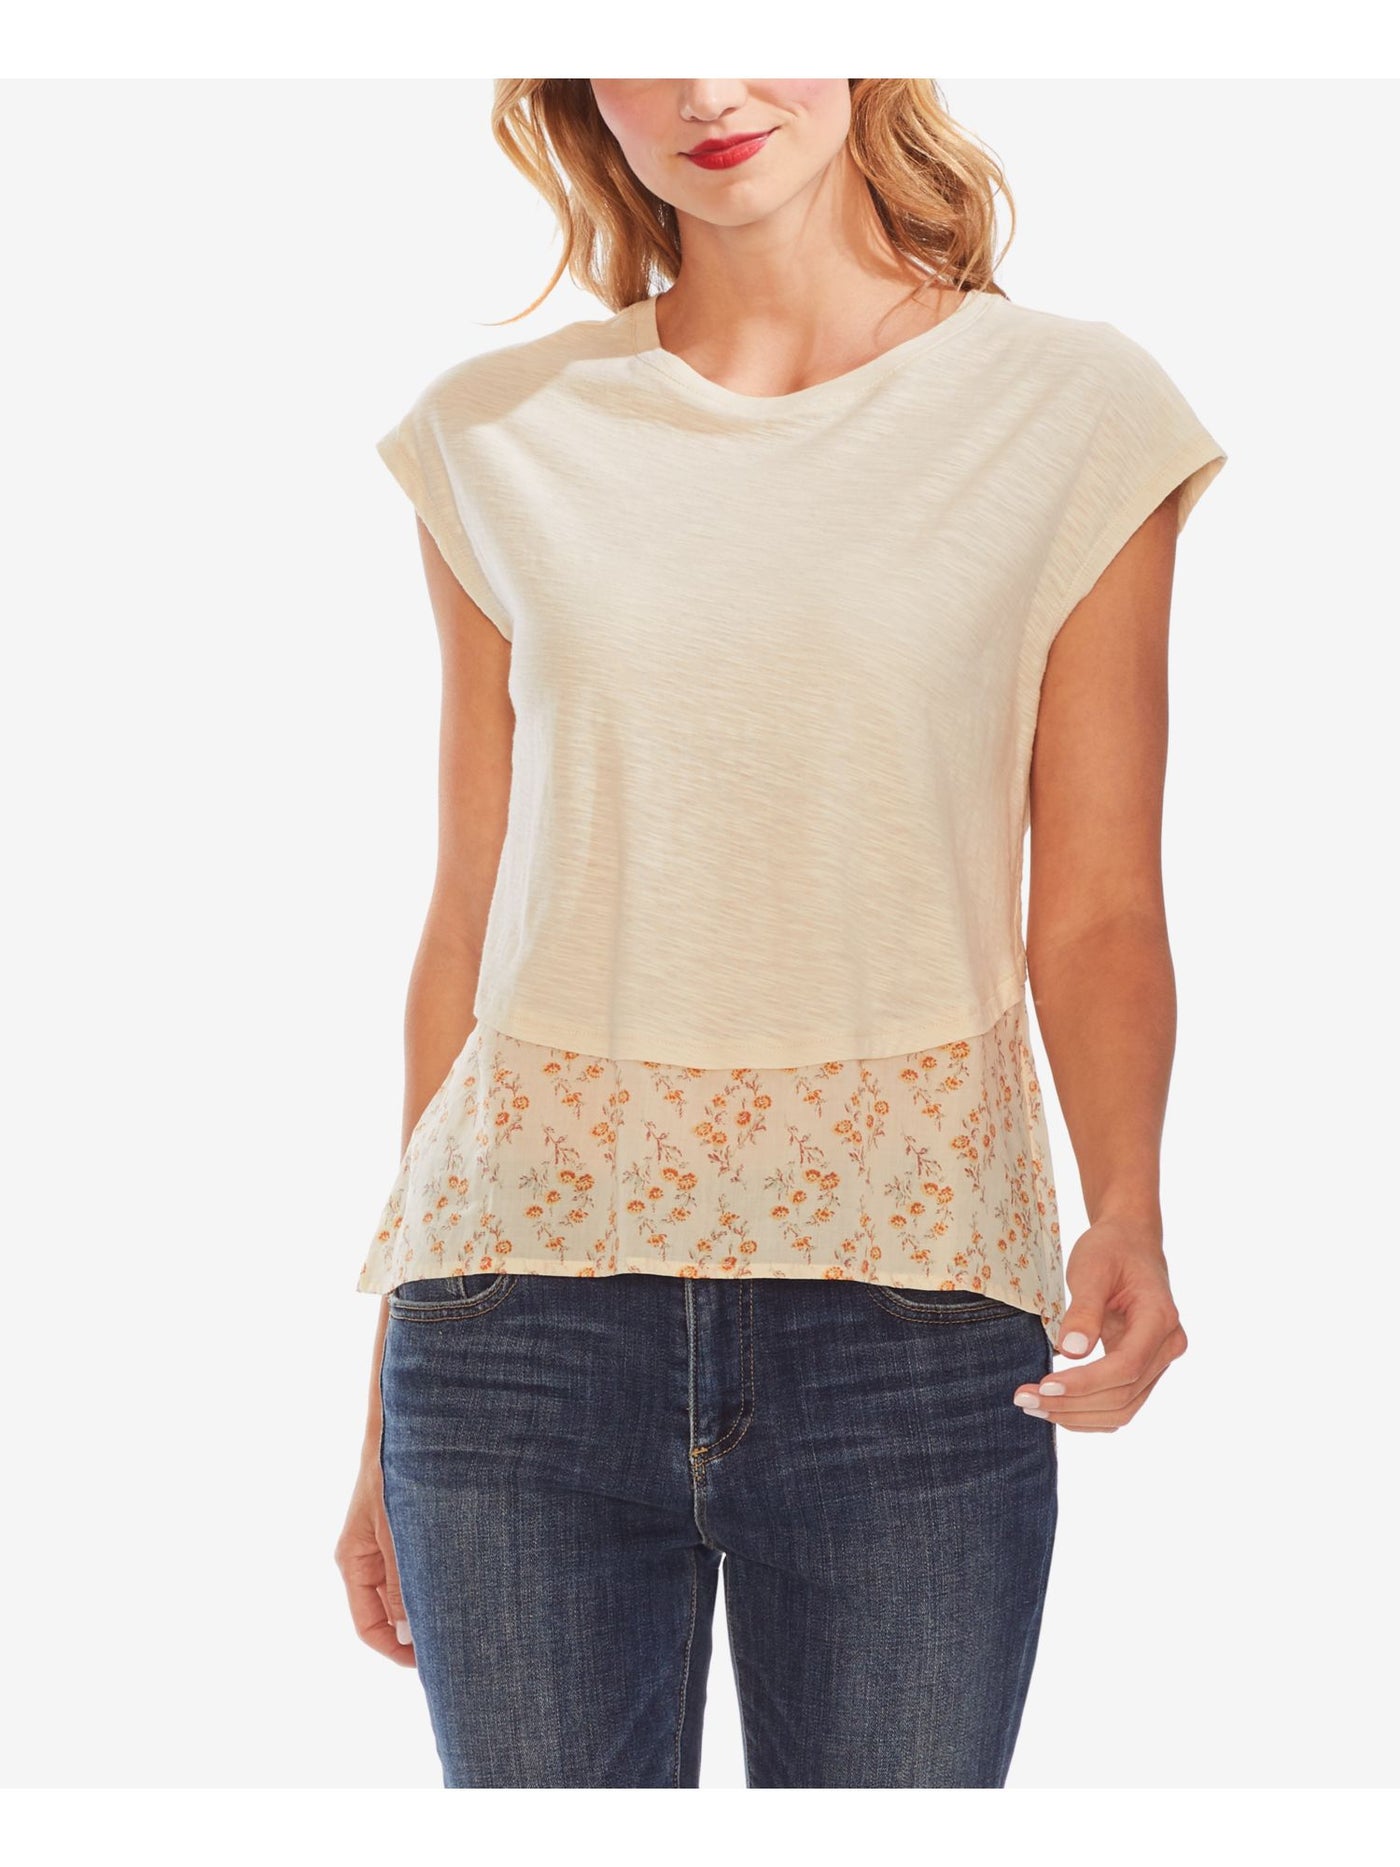 VINCE CAMUTO Womens Ivory Floral Short Sleeve Jewel Neck Top XS